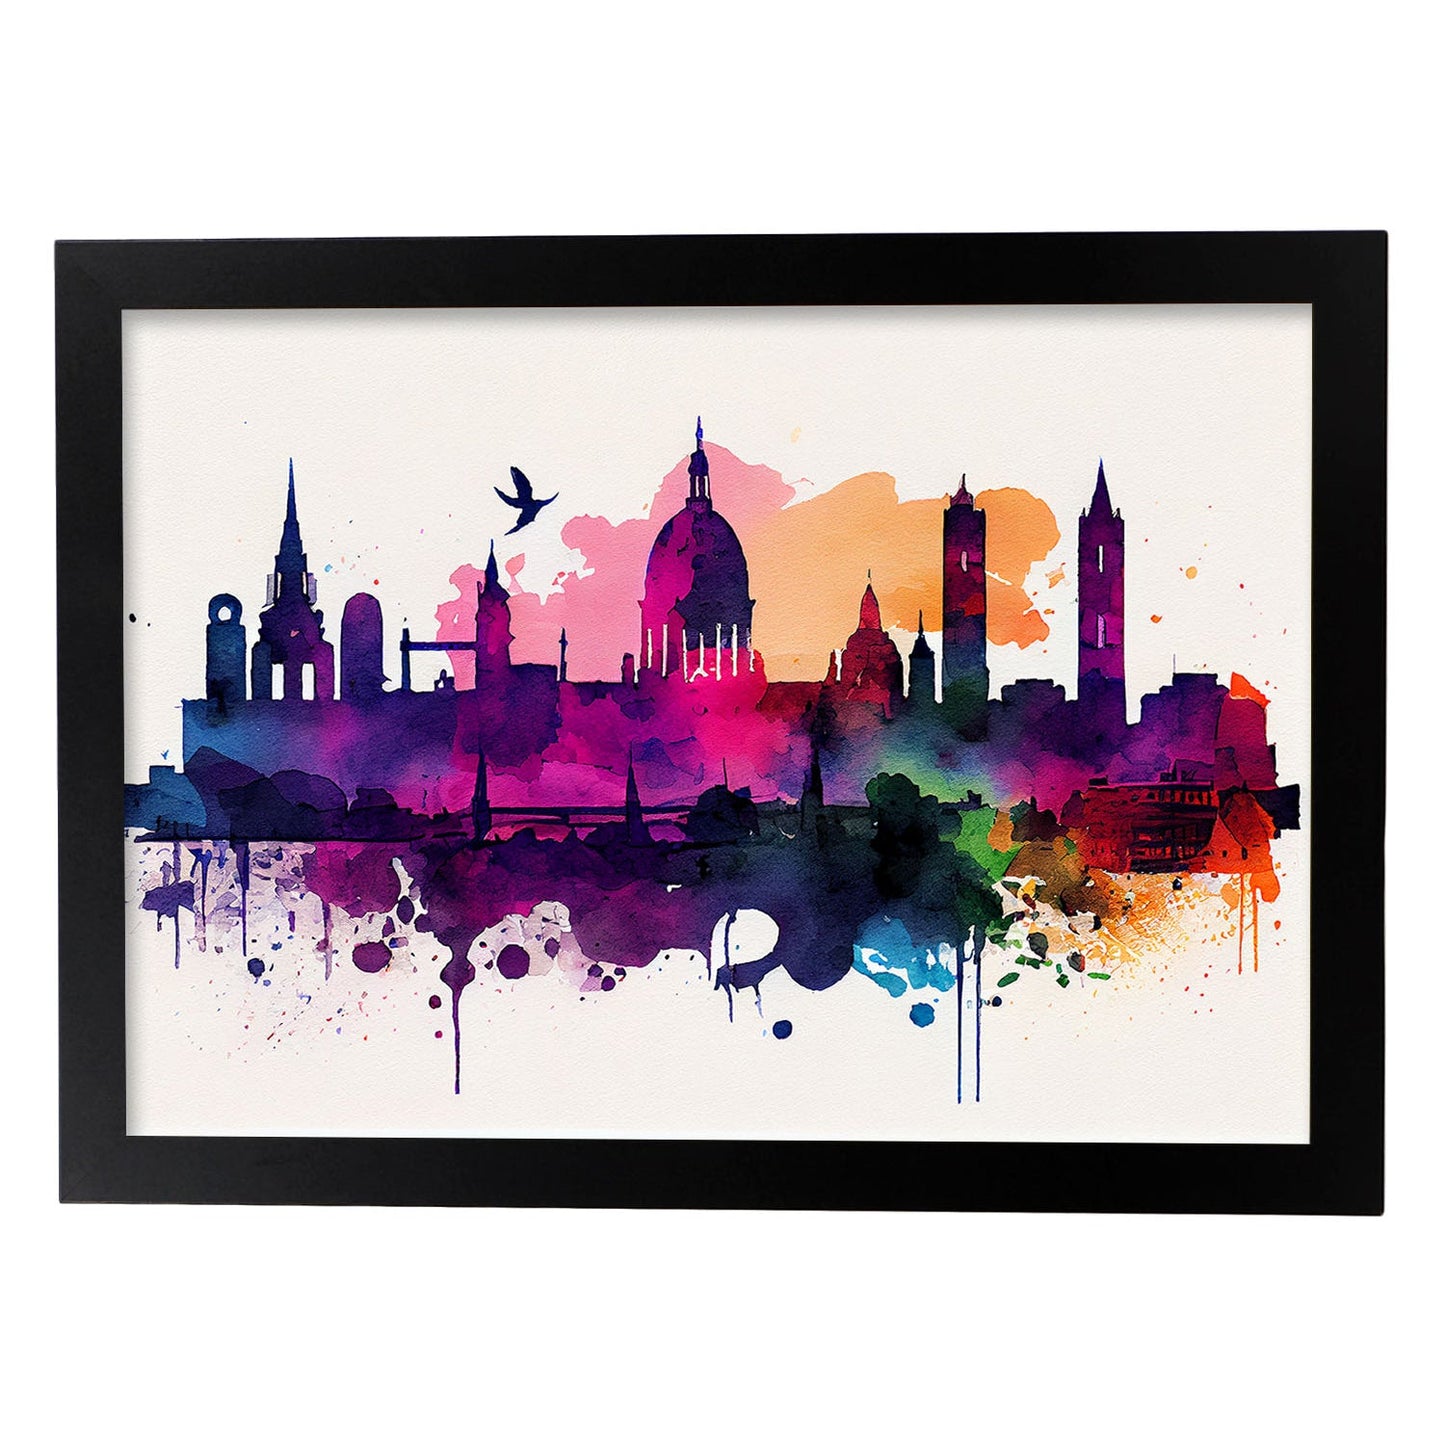 Nacnic watercolor of a skyline of the city of Dublin. Aesthetic Wall Art Prints for Bedroom or Living Room Design.